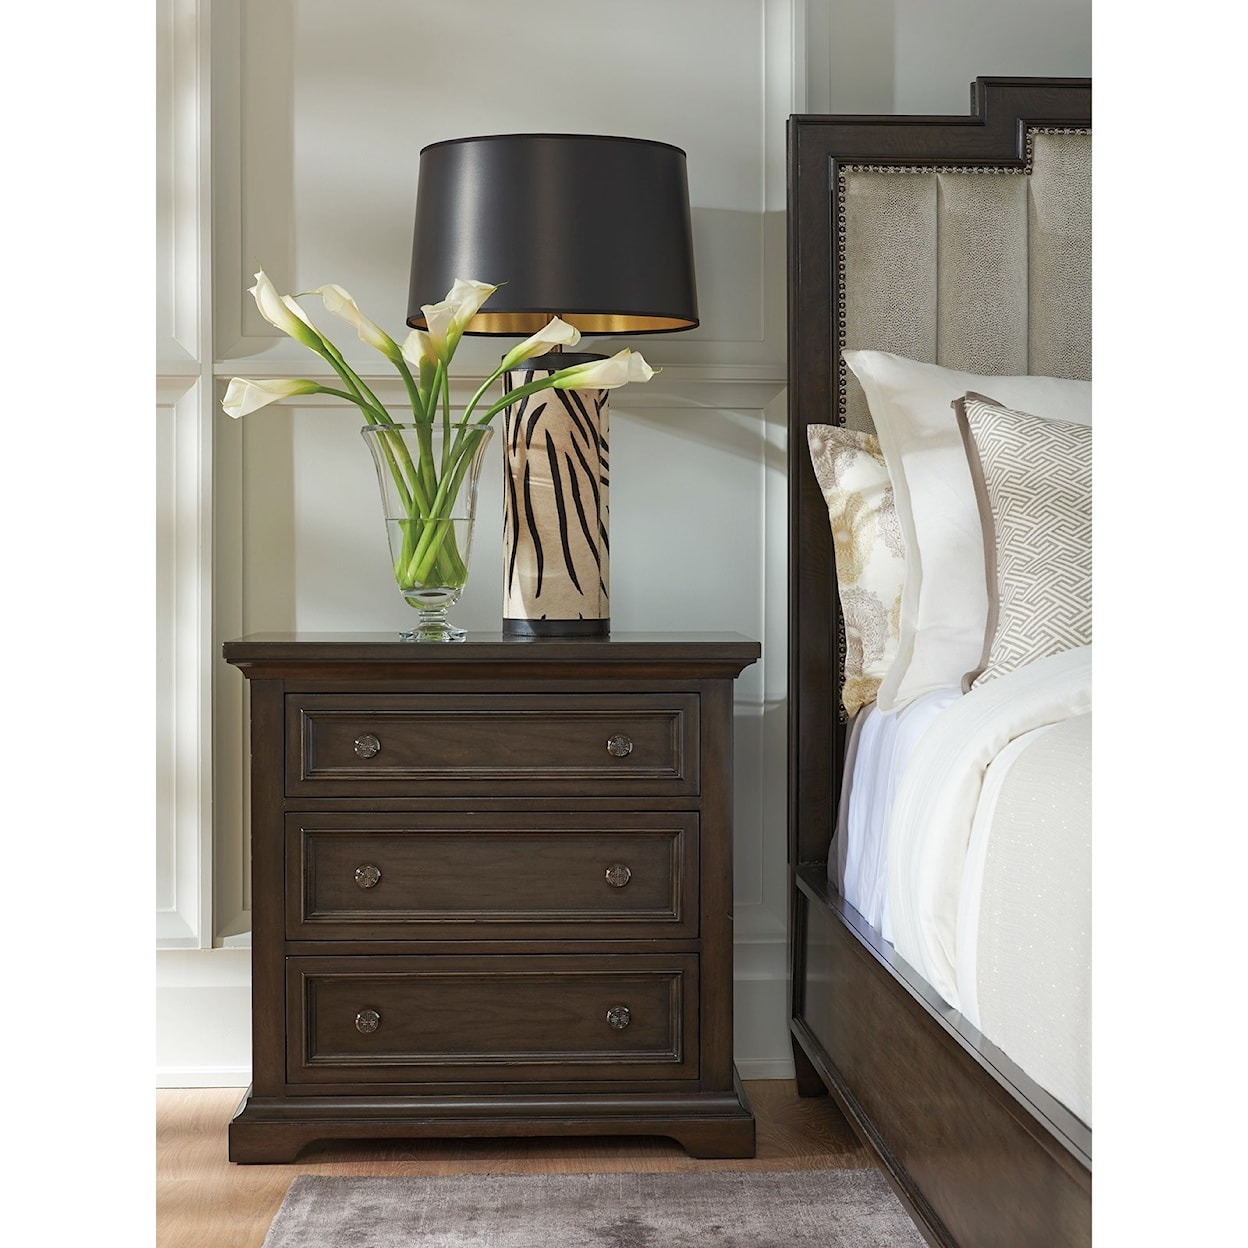 Barclay Butera Brentwood Crestwood Nightstand